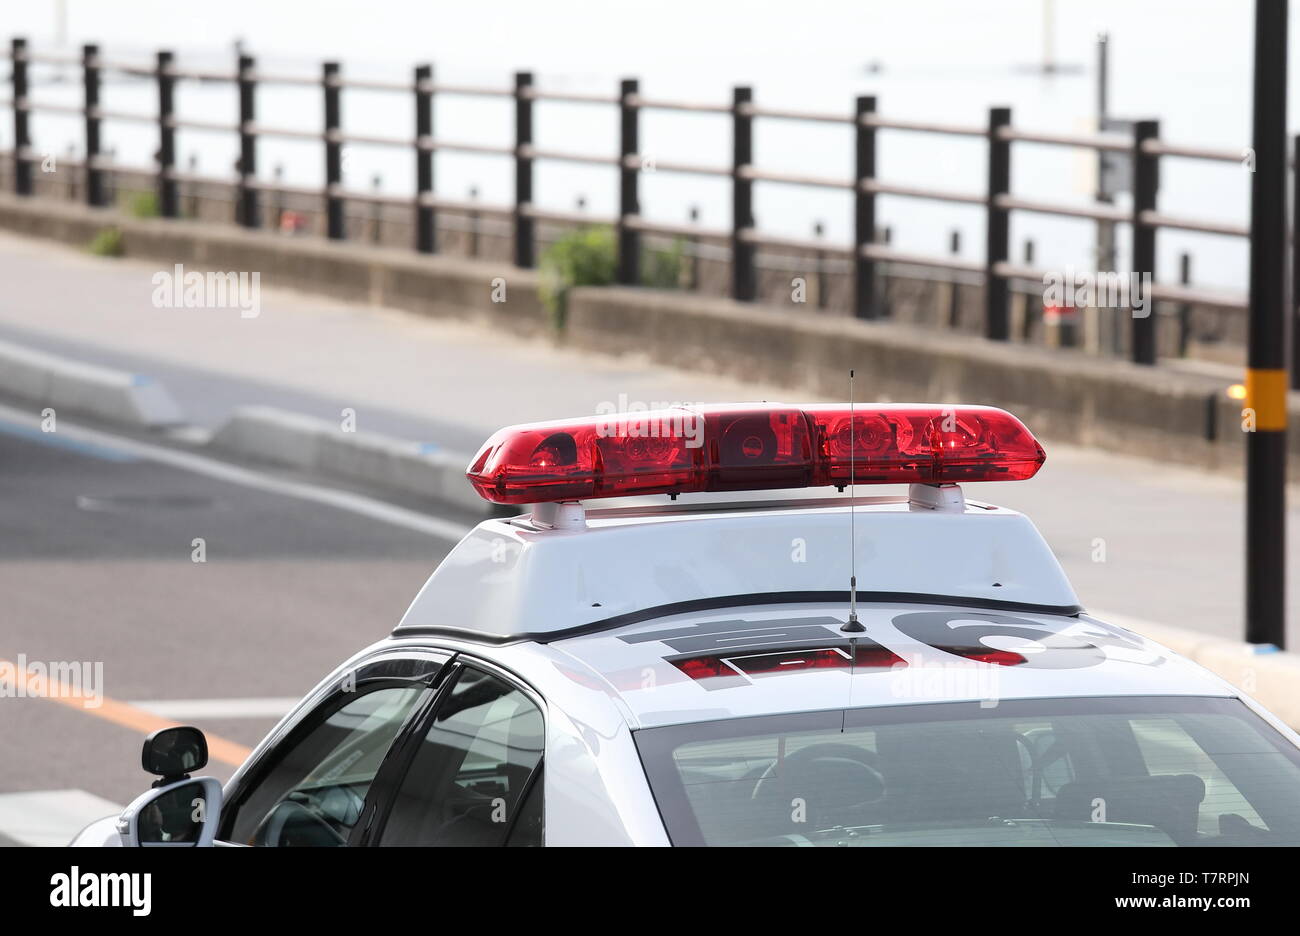 Japanese police car with red light Japan Stock Photo